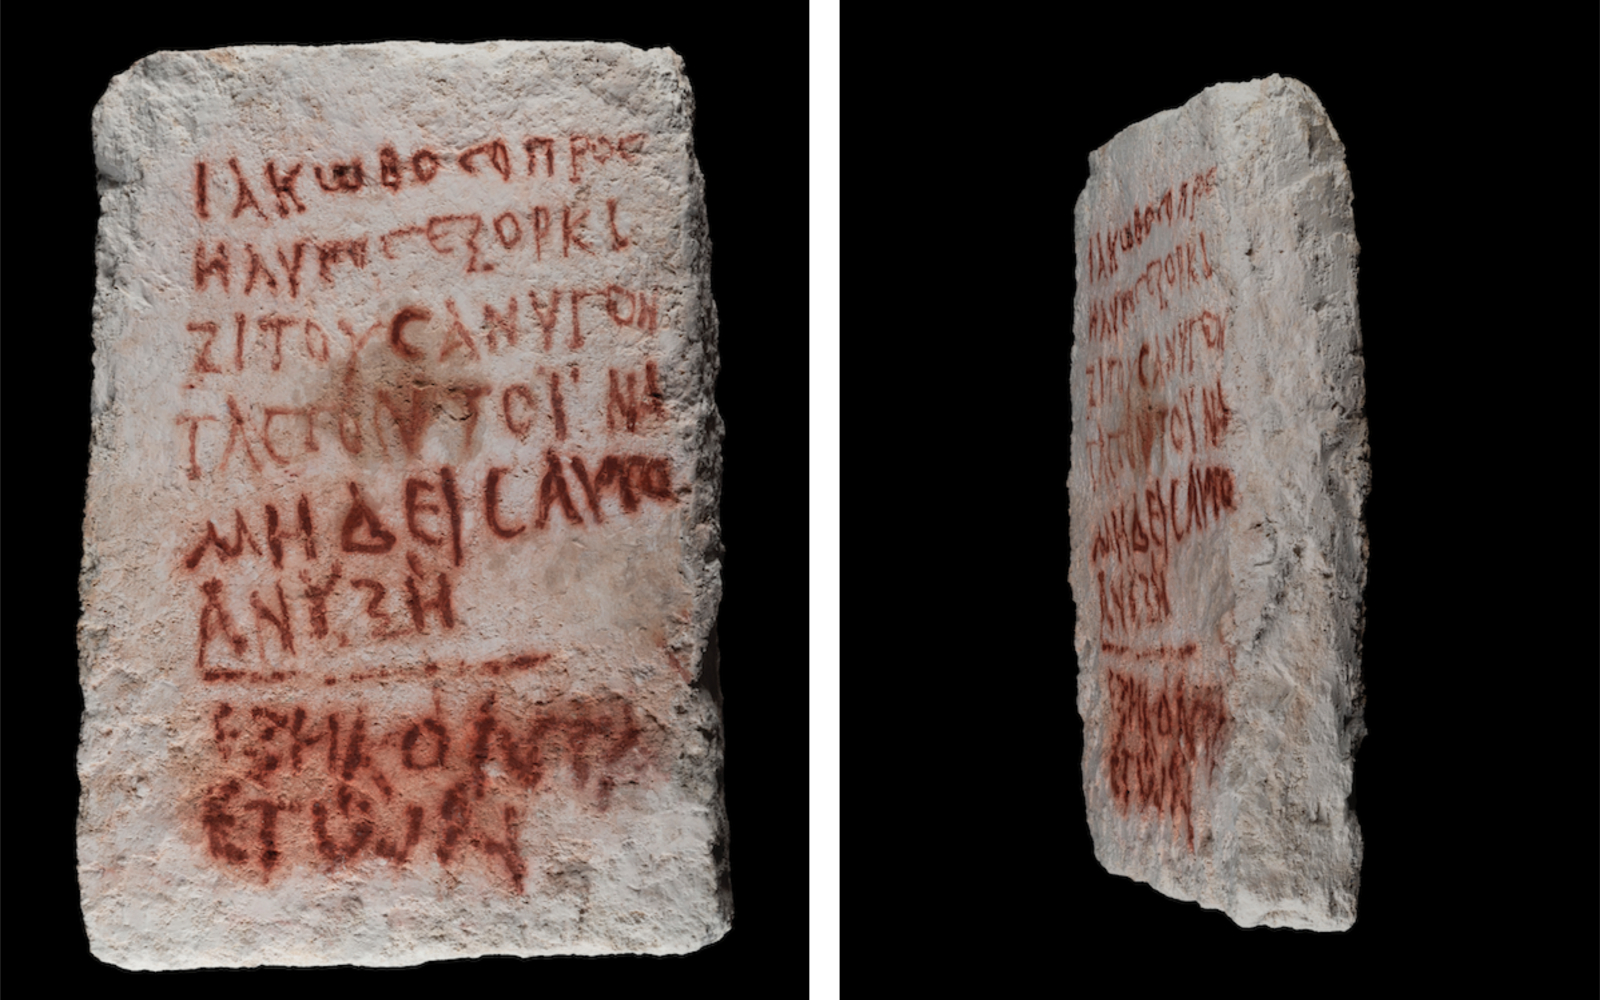 1800 Year-Old Grave Marker In Red Ink Found In Galilee, Israel